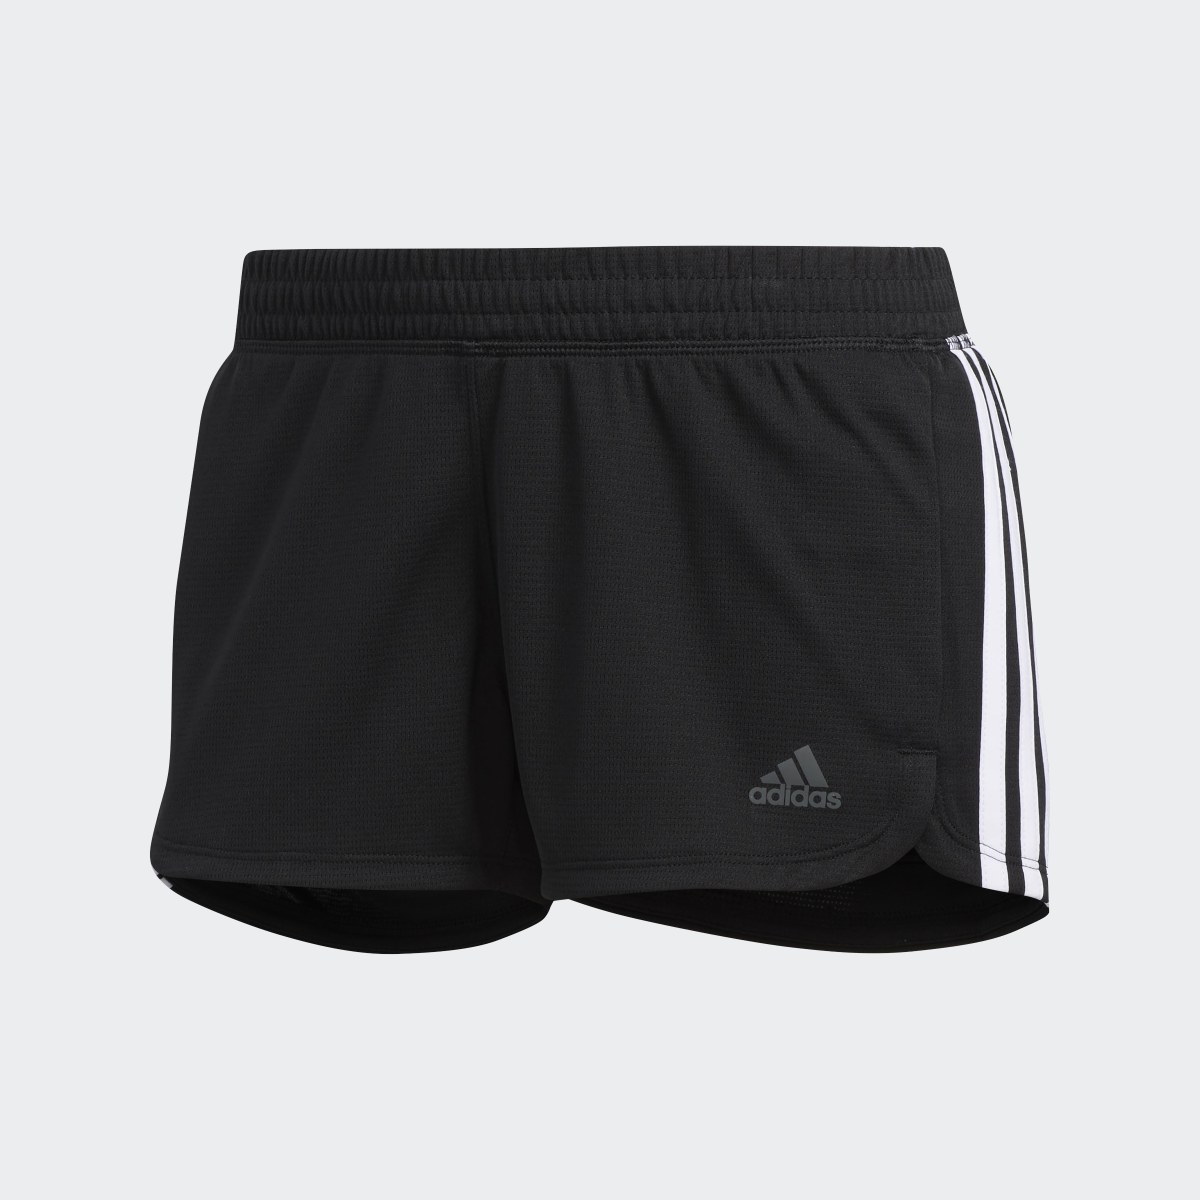 Adidas Pacer 3-Stripes Knit Shorts. 4